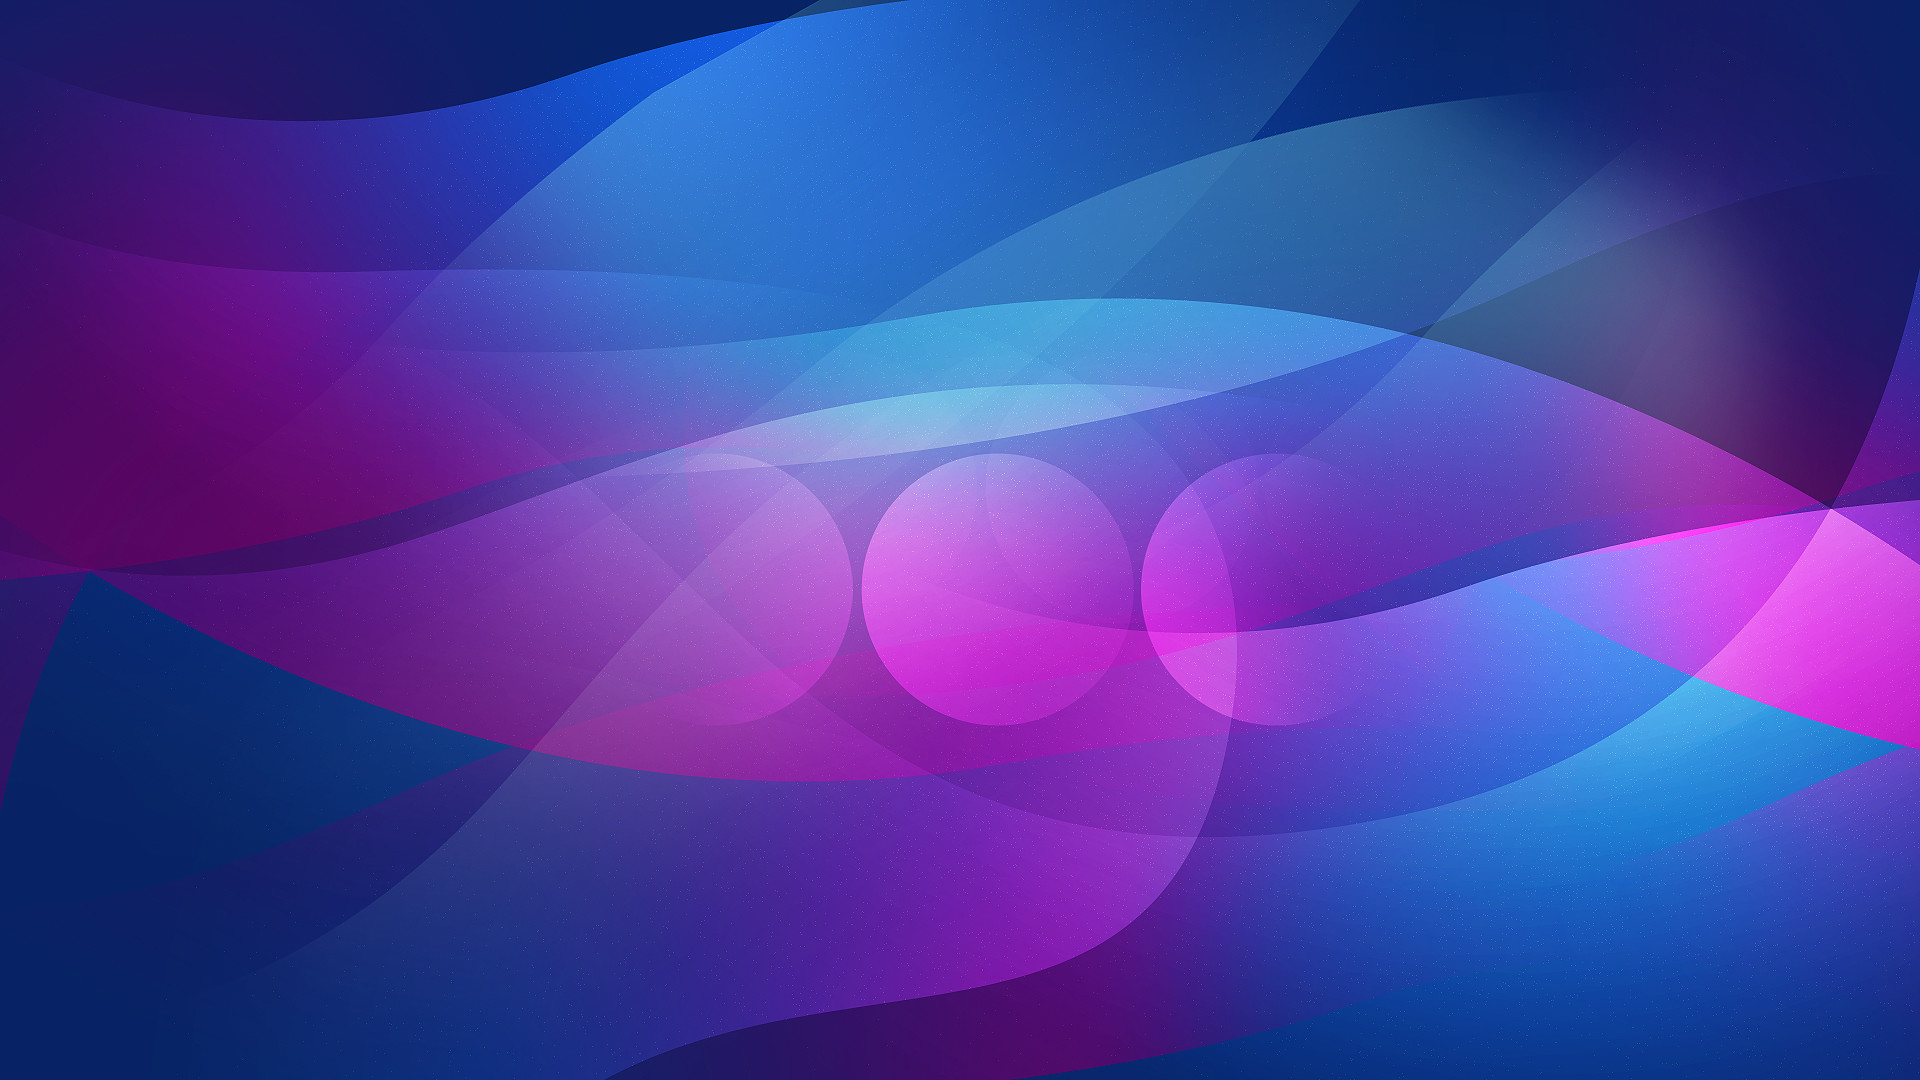 1920x1080 Wallpaper, Abstract, Blue, Circles, Pink, Line, Cool, Colourful,